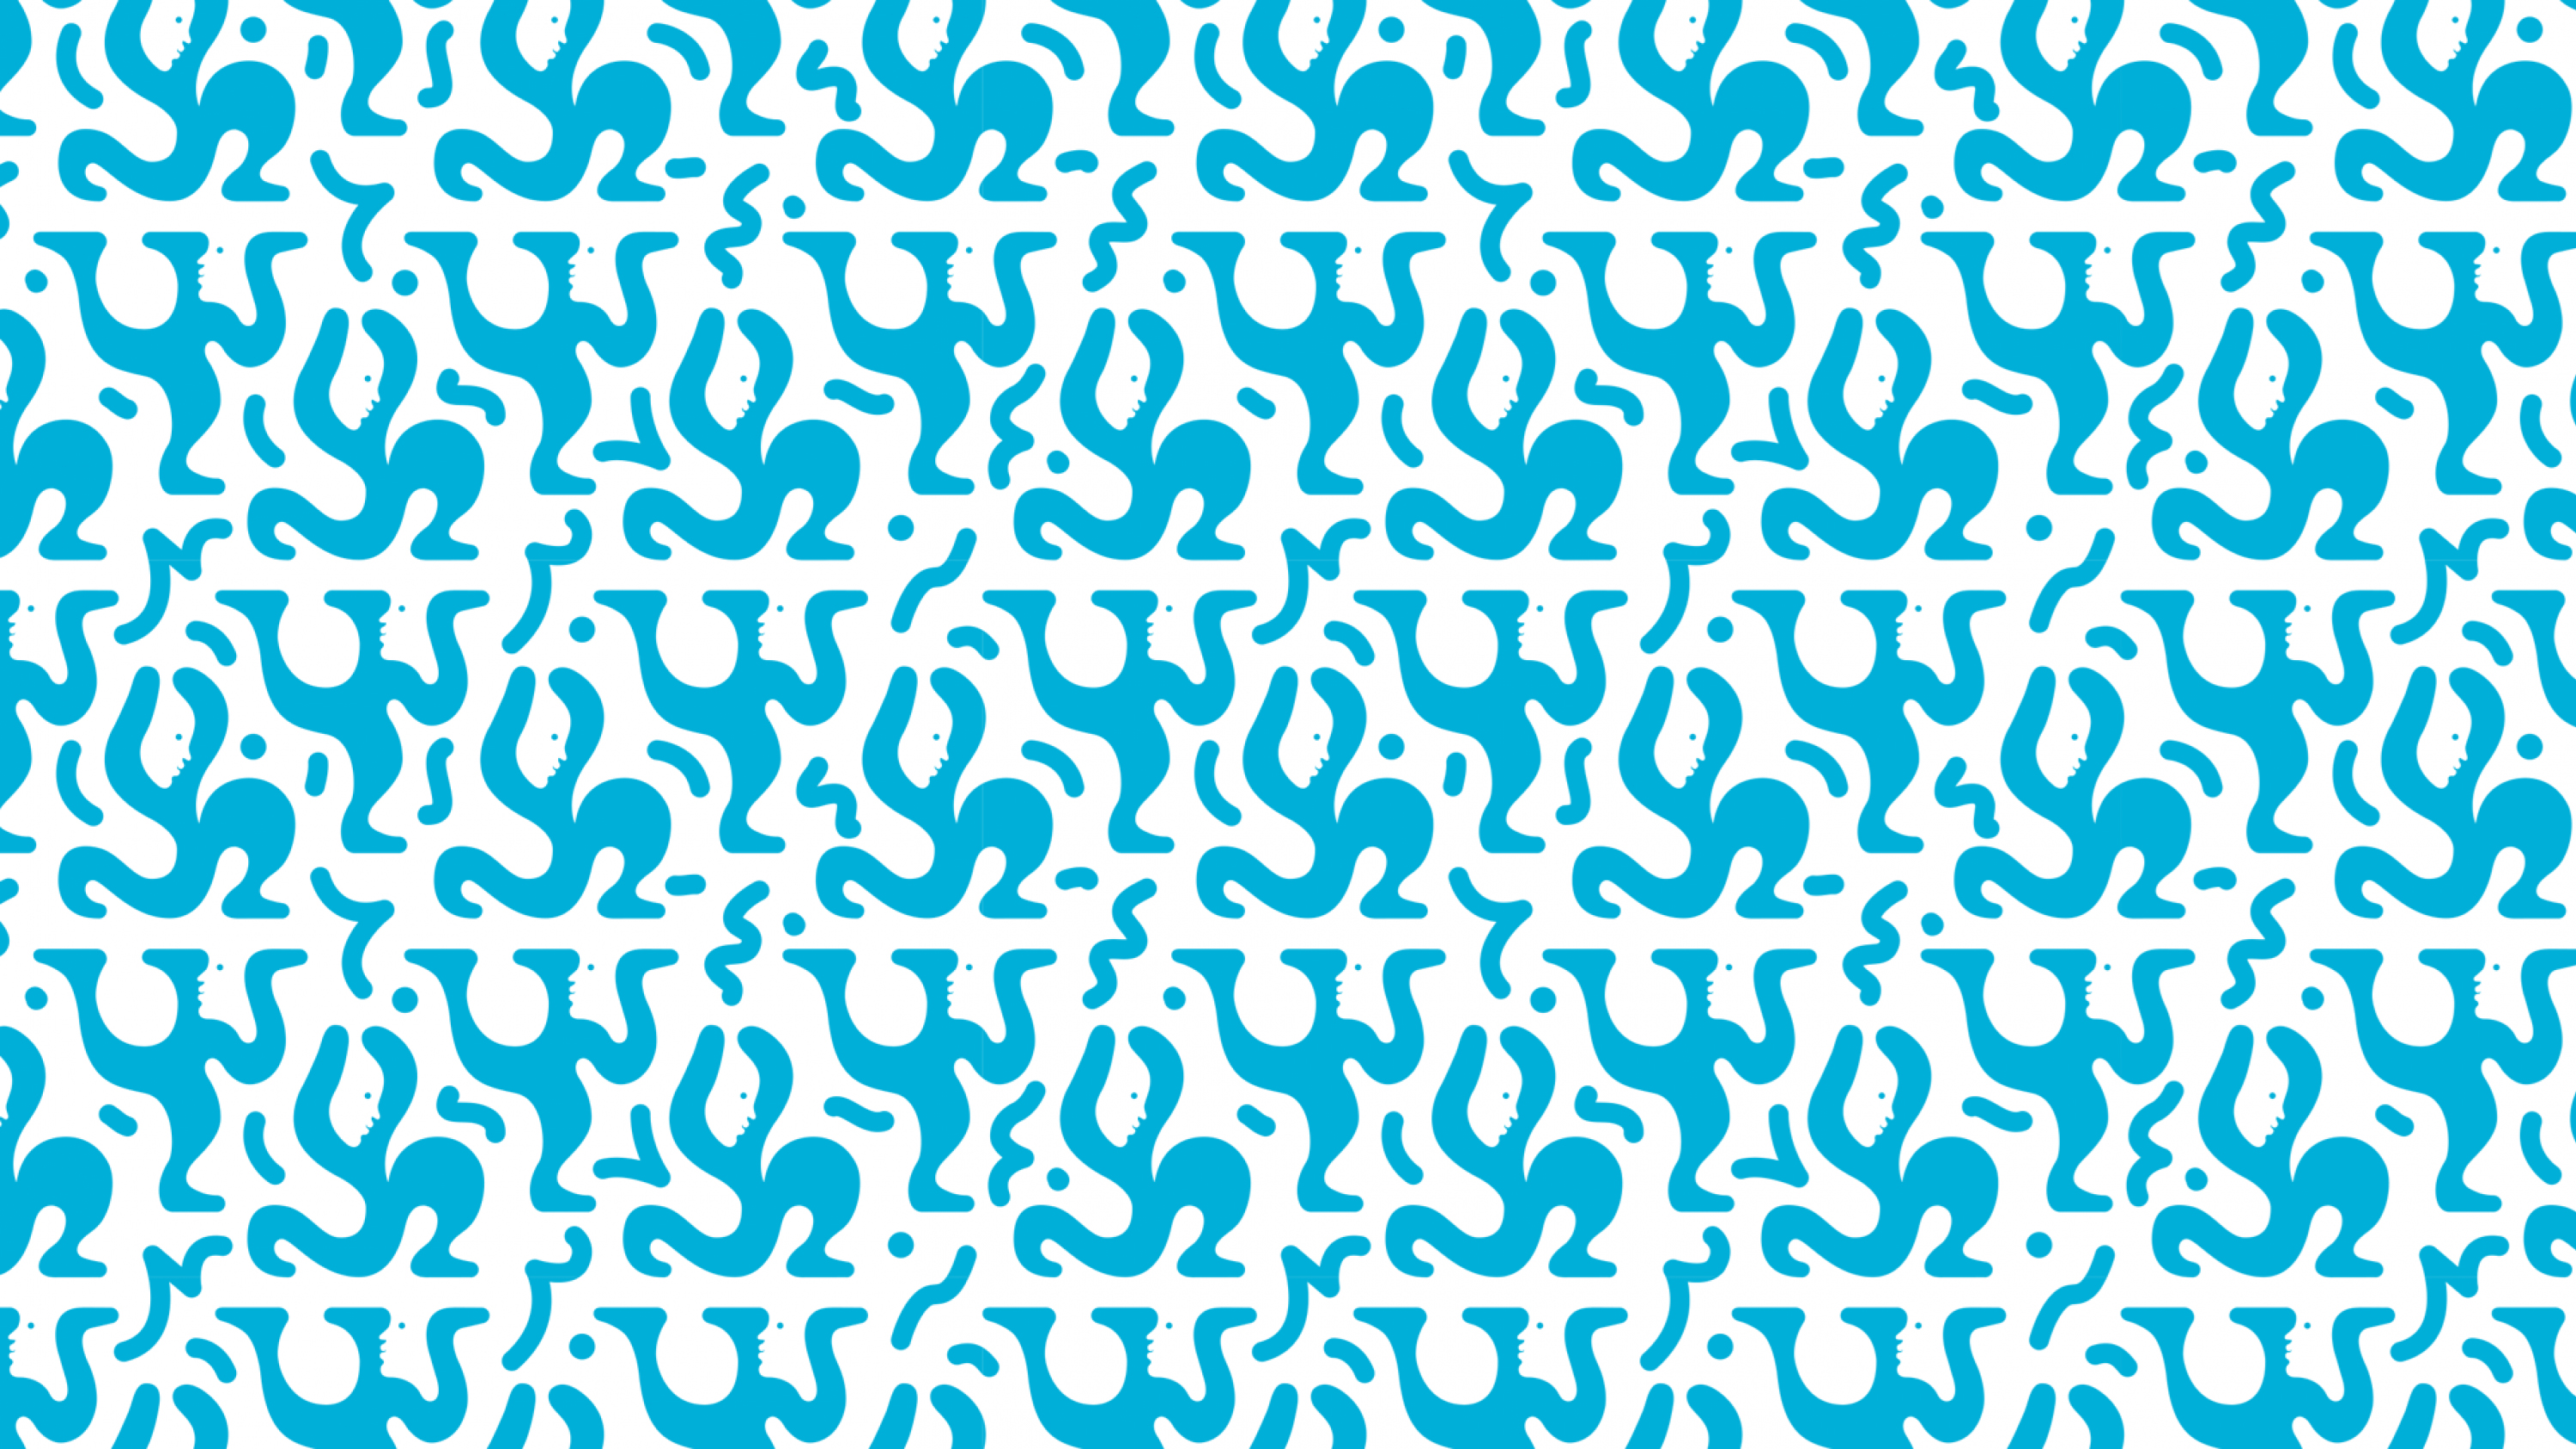 Logo as a pattern designed by Tsto for Finnish health and wellbeing project Yksi Elämä. Featured on bpando.org